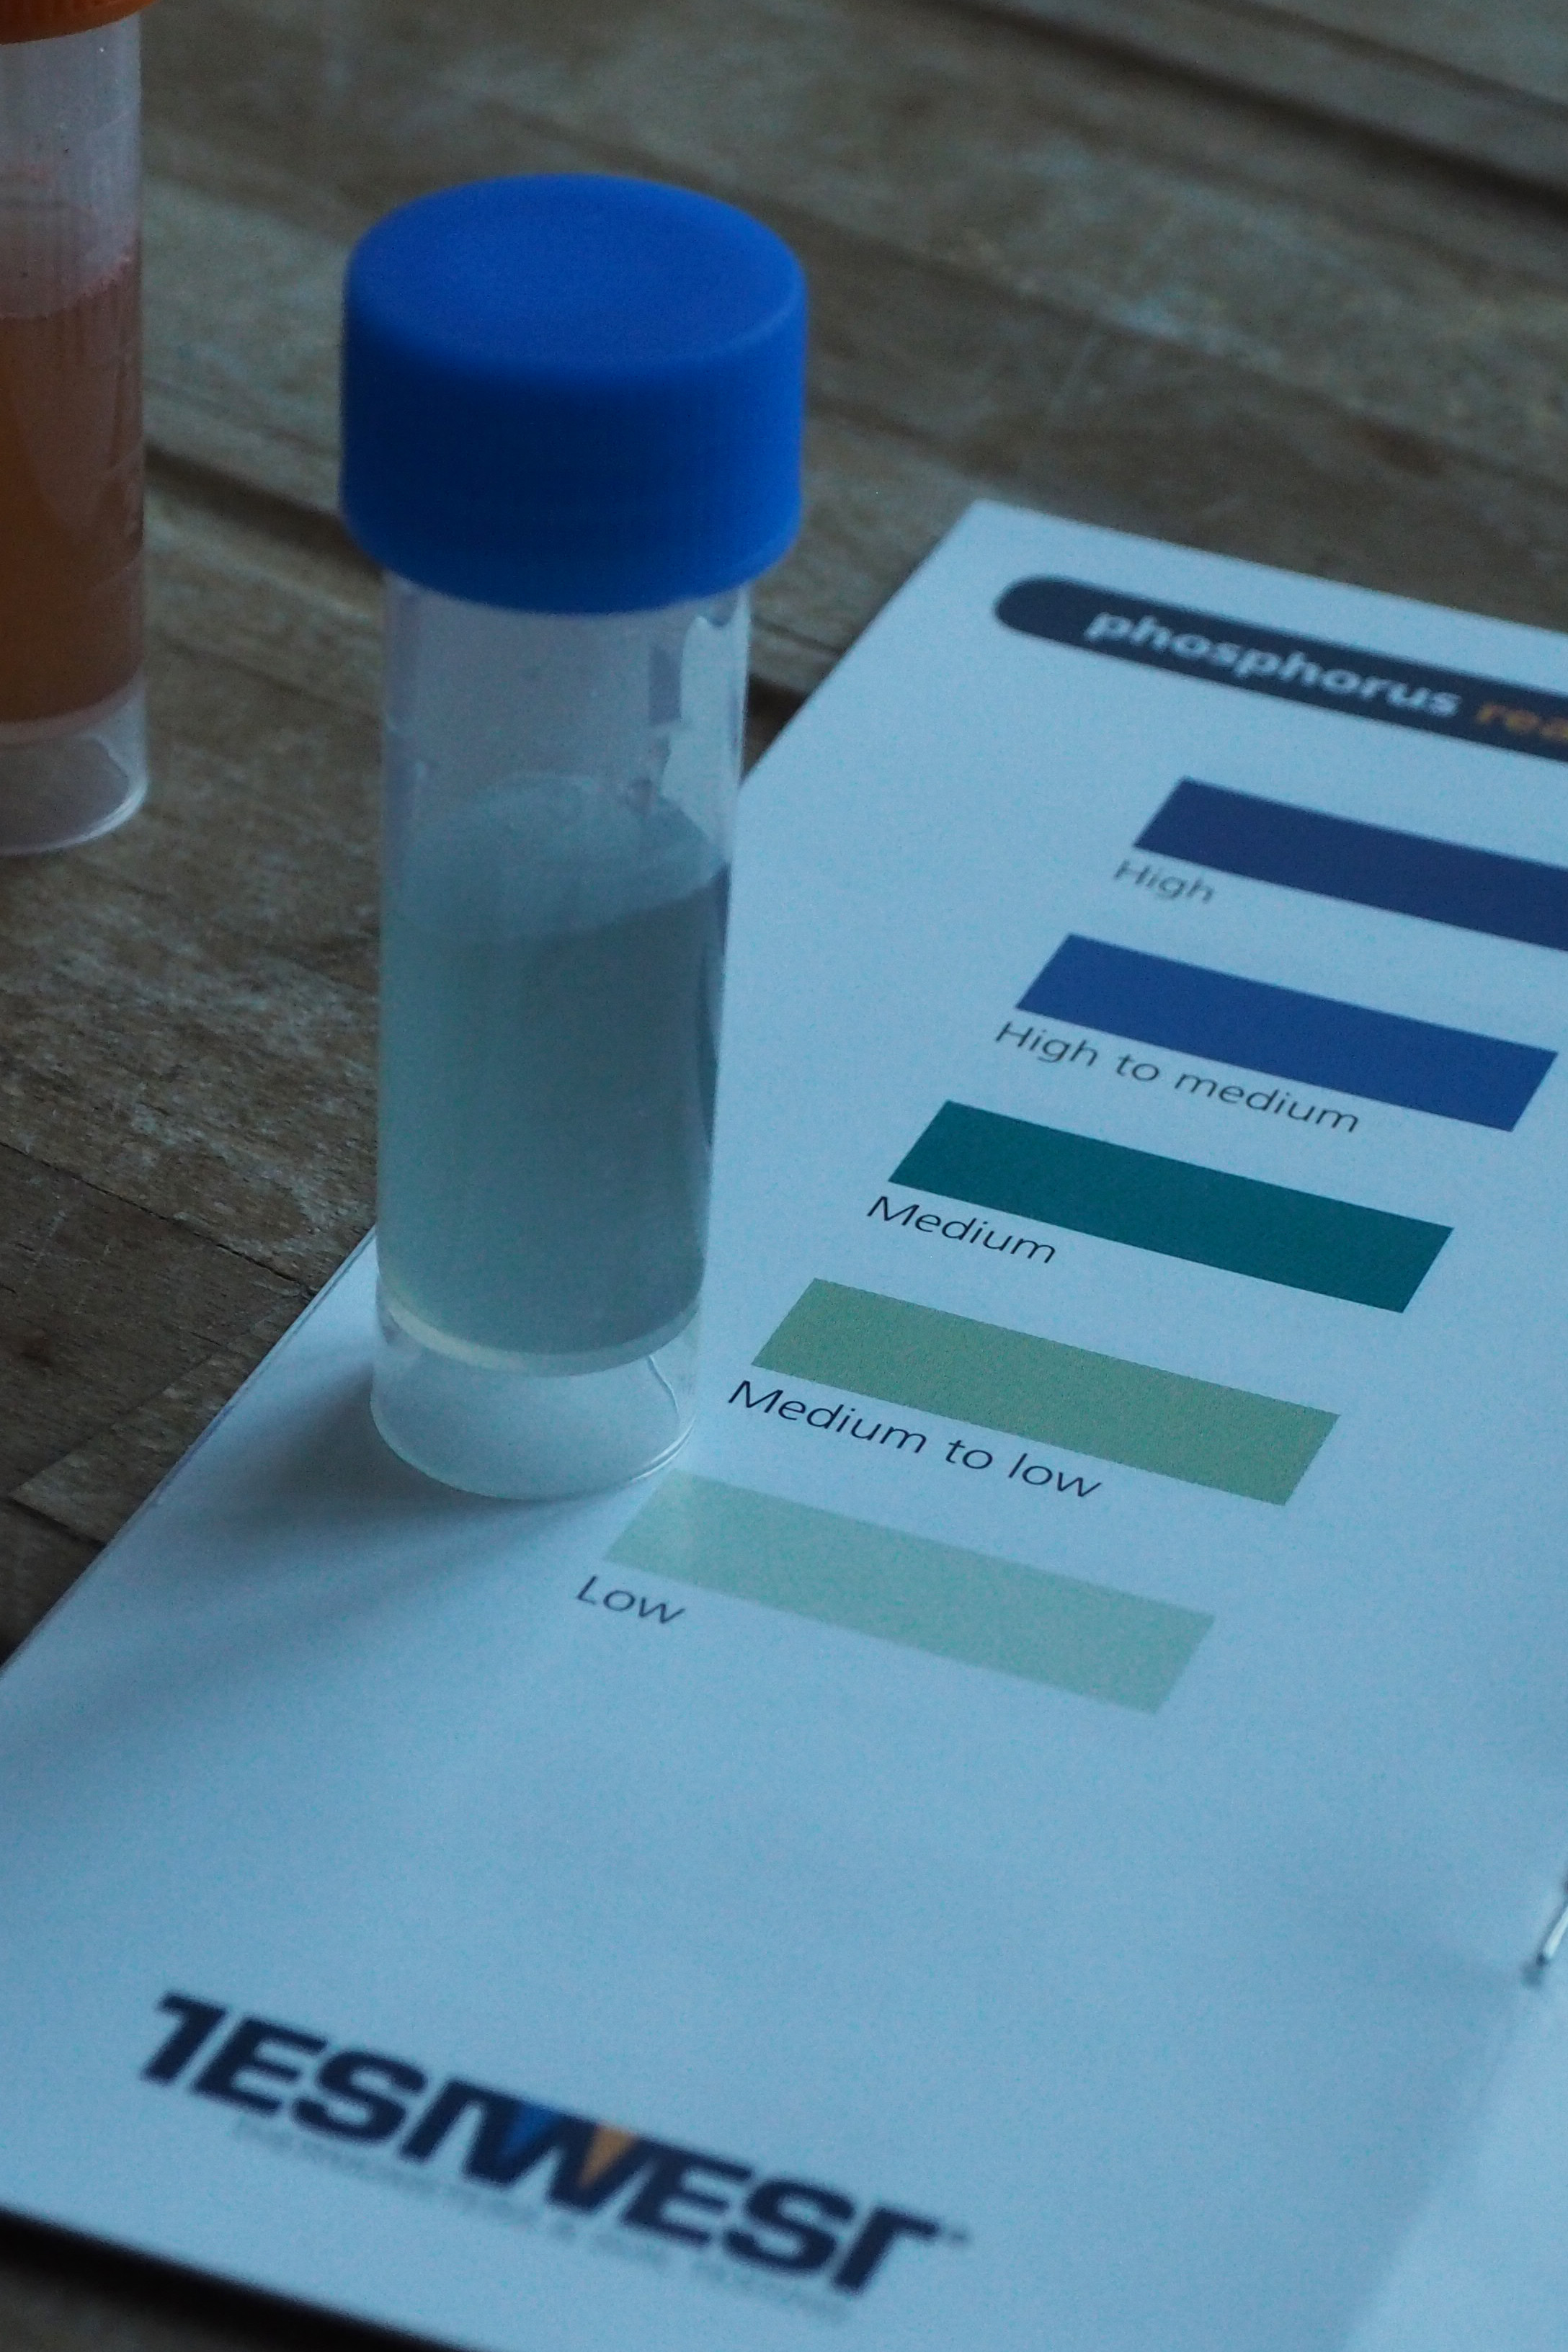 Find out which nutrients your soil lacks with a soil test